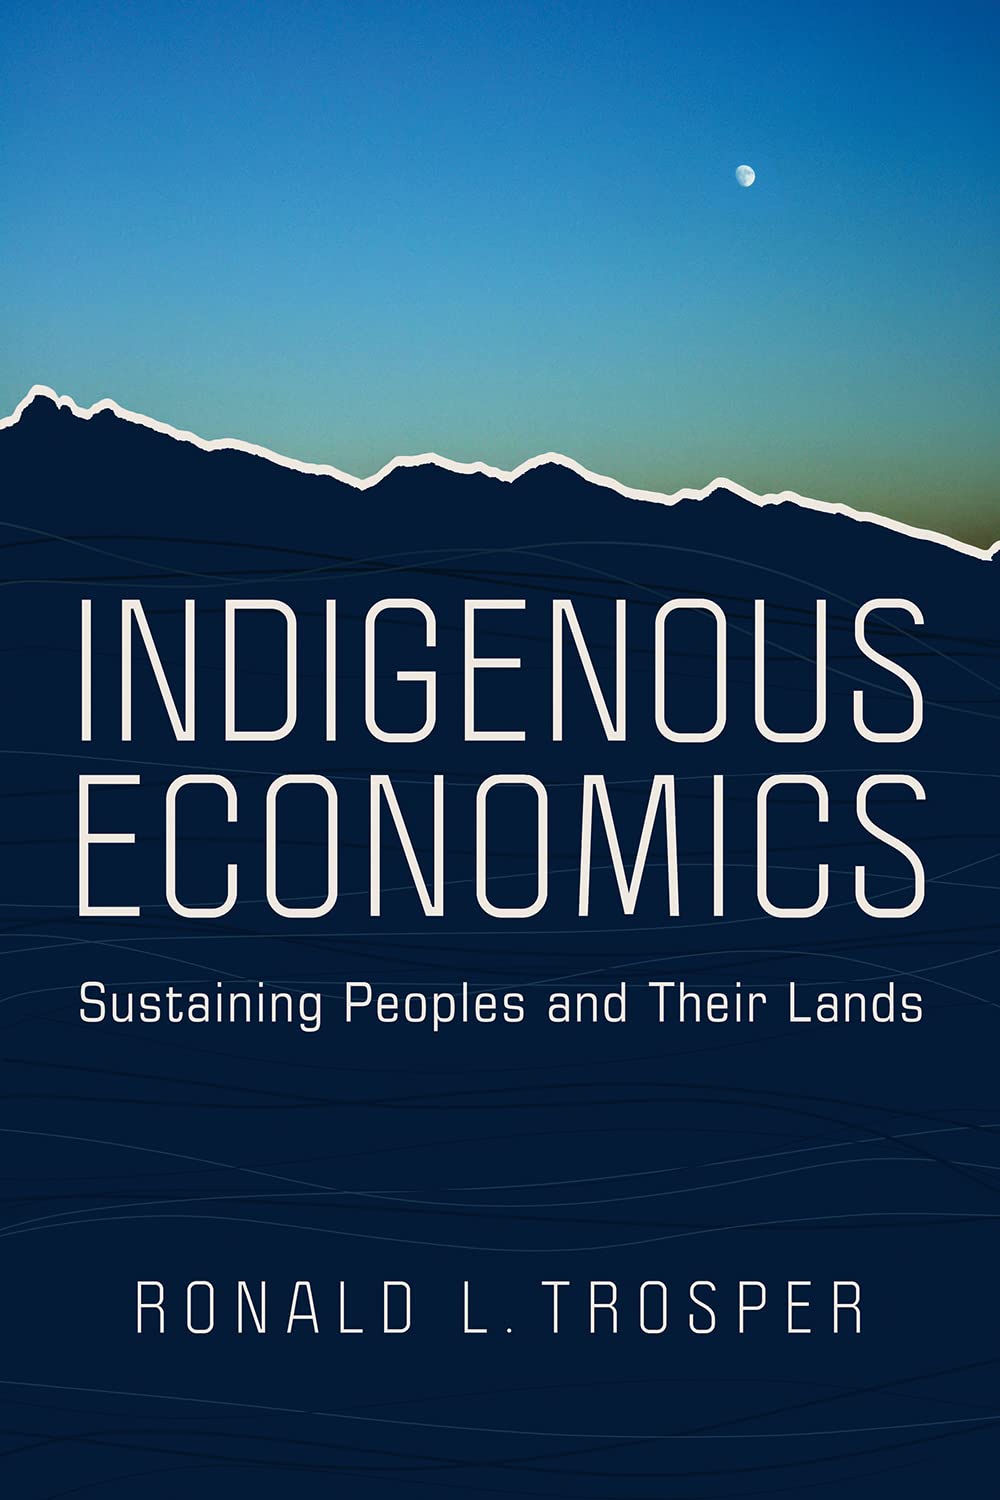  Indigenous Economics: Sustaining Peoples and Their Lands  by Ronald L. Trosper